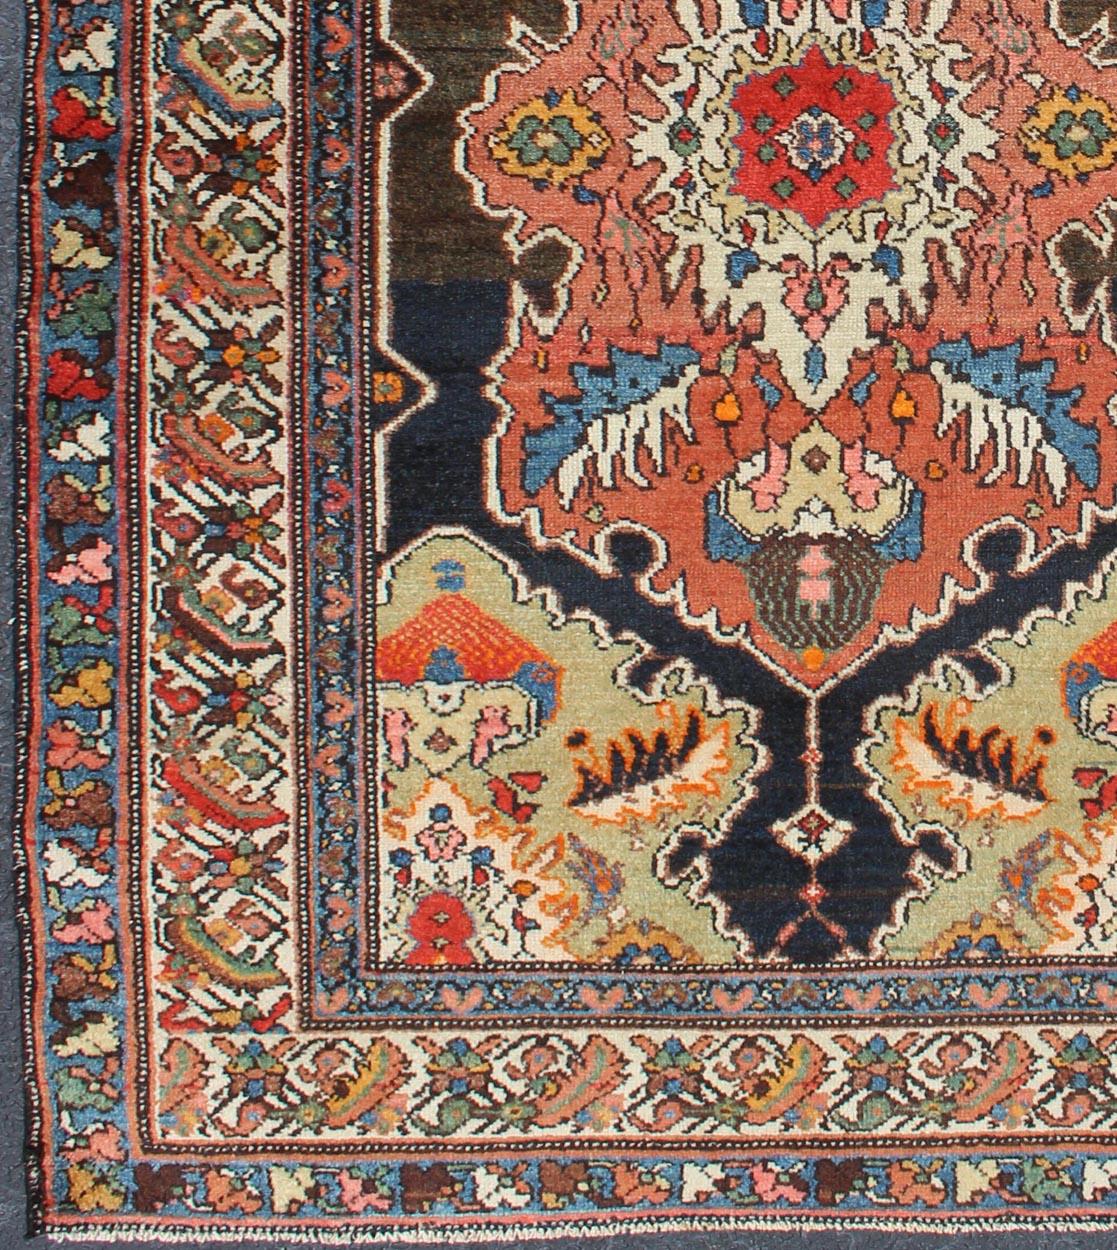 Antique Malayer rug from Persia with medallion and decorated cornices, rug 19-0403, country of origin / type: Iran / Malayer, circa 1910

This beautiful antique Malayer rug from Persia features a unique medallion design, the central field is framed